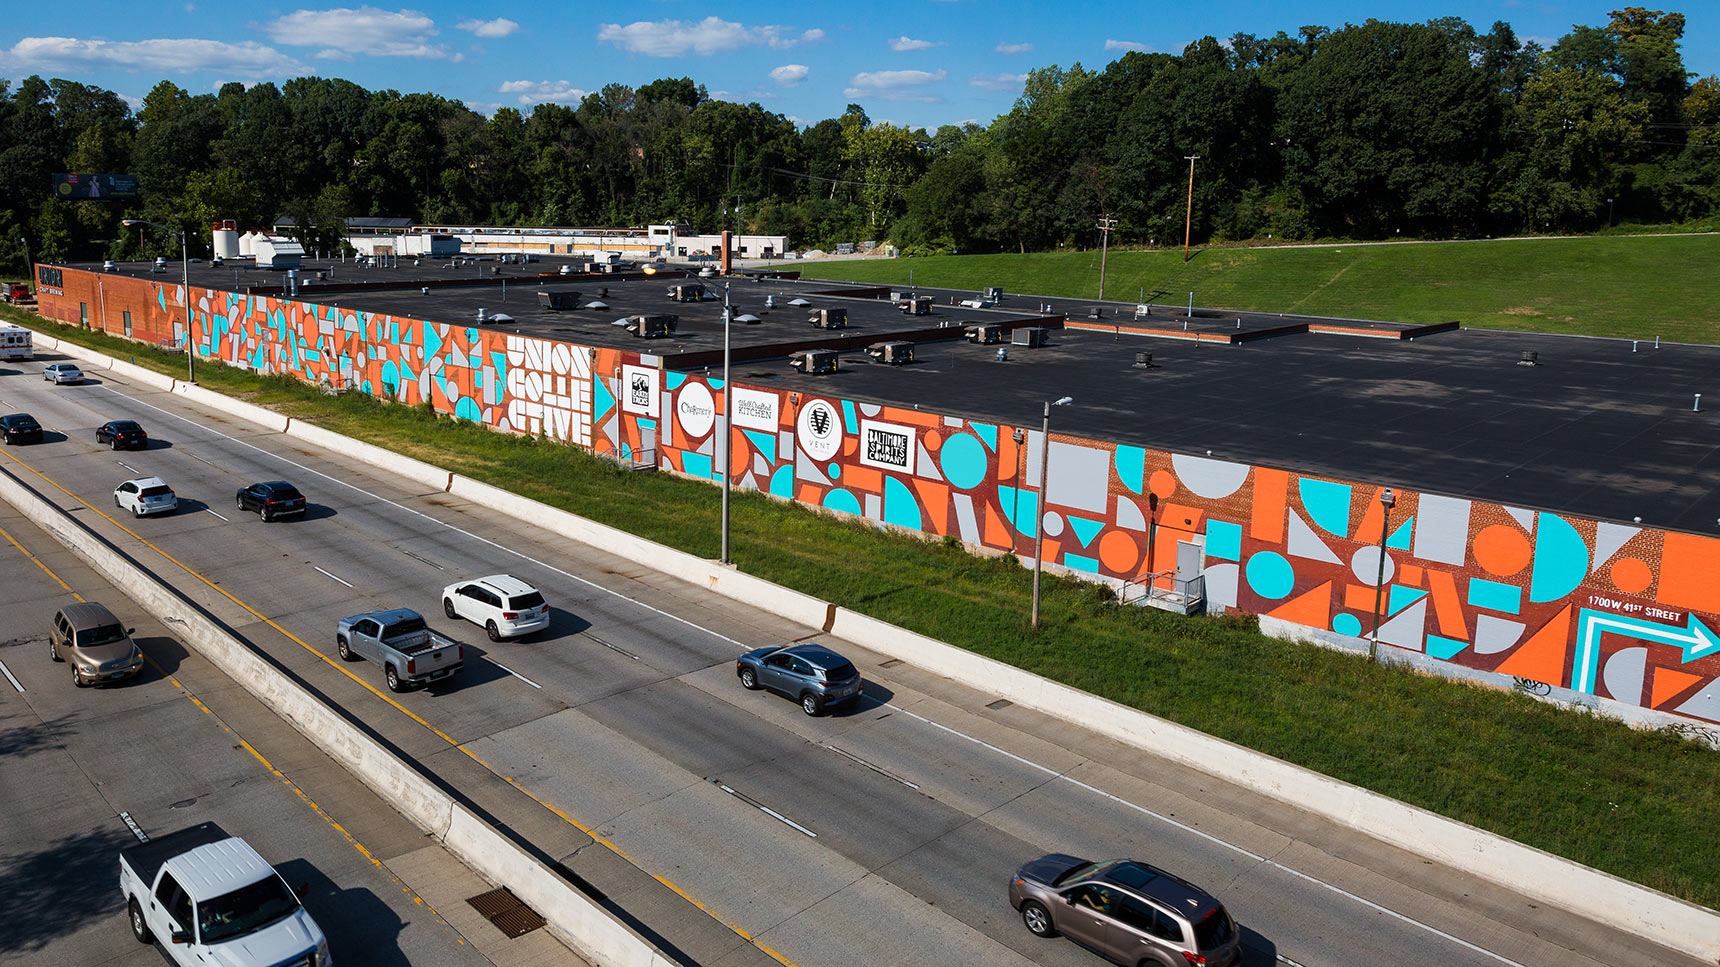 Massive mural on the side of the Union Collective warehouse building in baltimore composed of colorful orange, blue, and grey geometric shapes including circles, triangles, parallelograms, squares, etc.